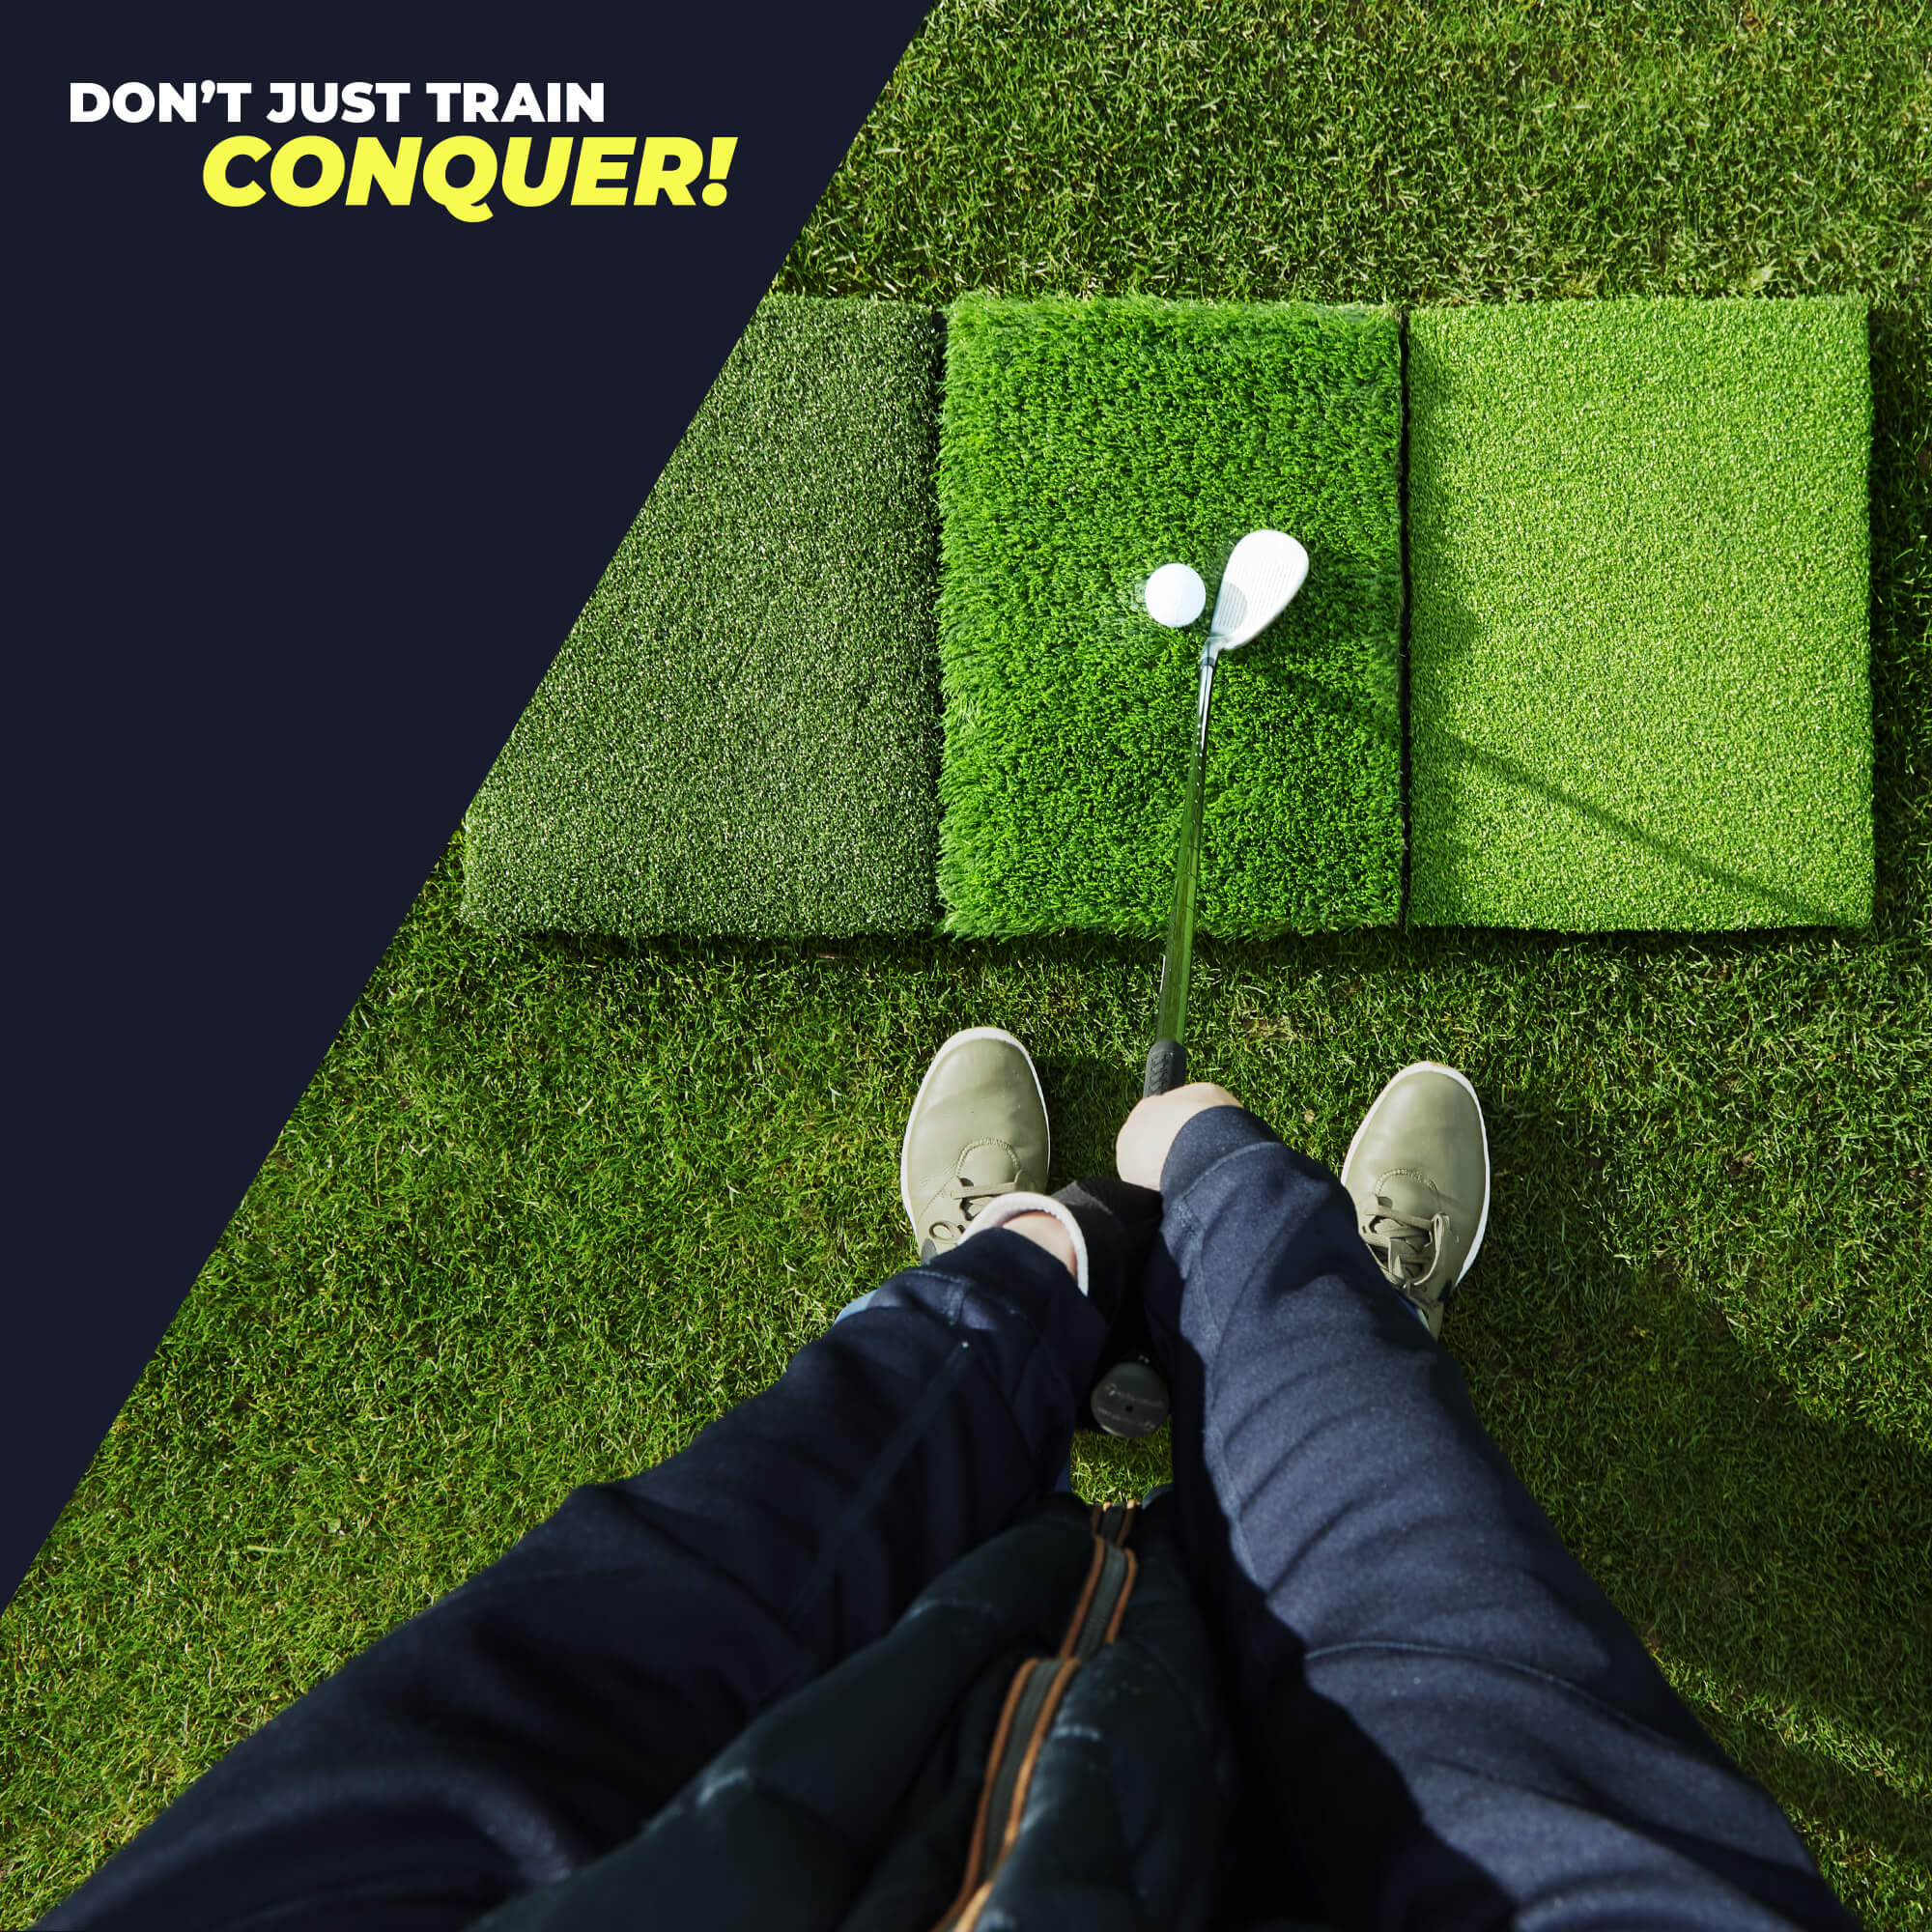 Conquer Concrete: The Truth About Wearing Golf Shoes